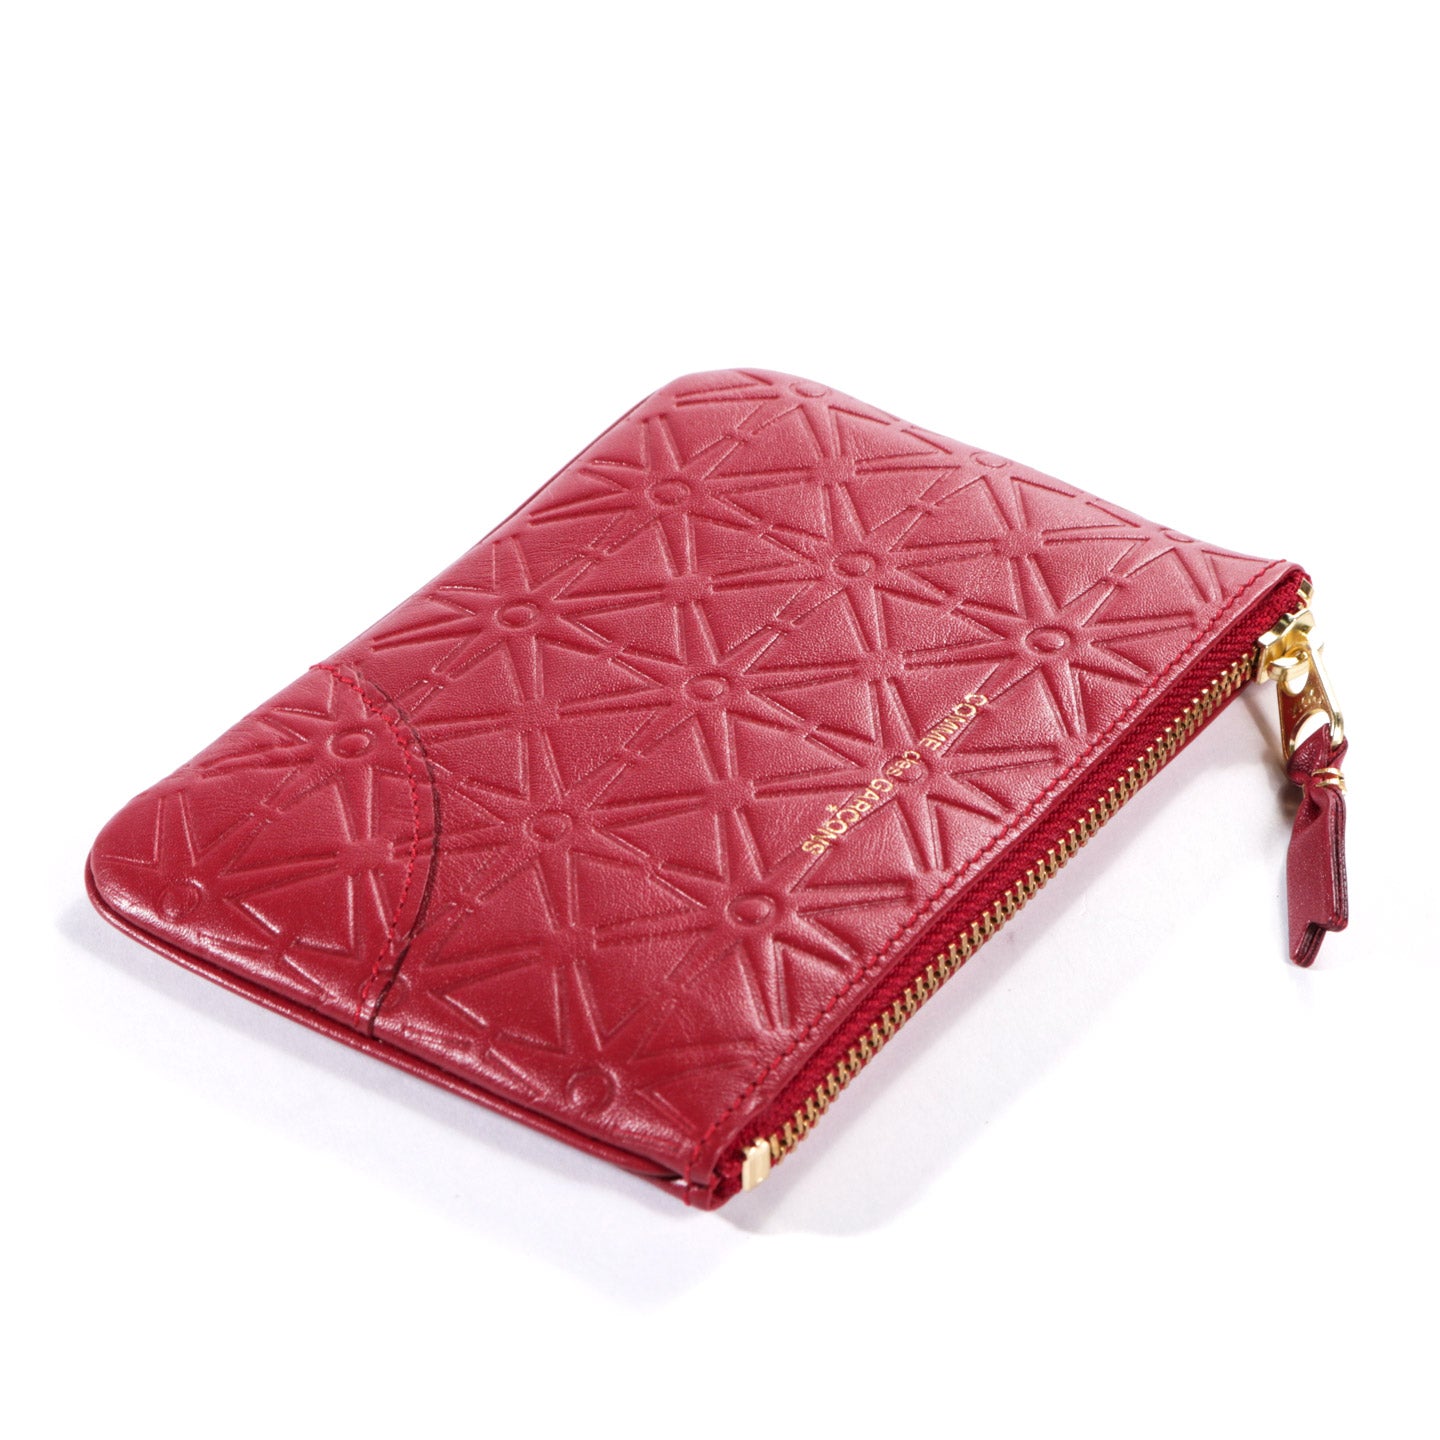 COMME DES GARCONS SA810E EMBOSSED LEATHER ZIP WALLET RED